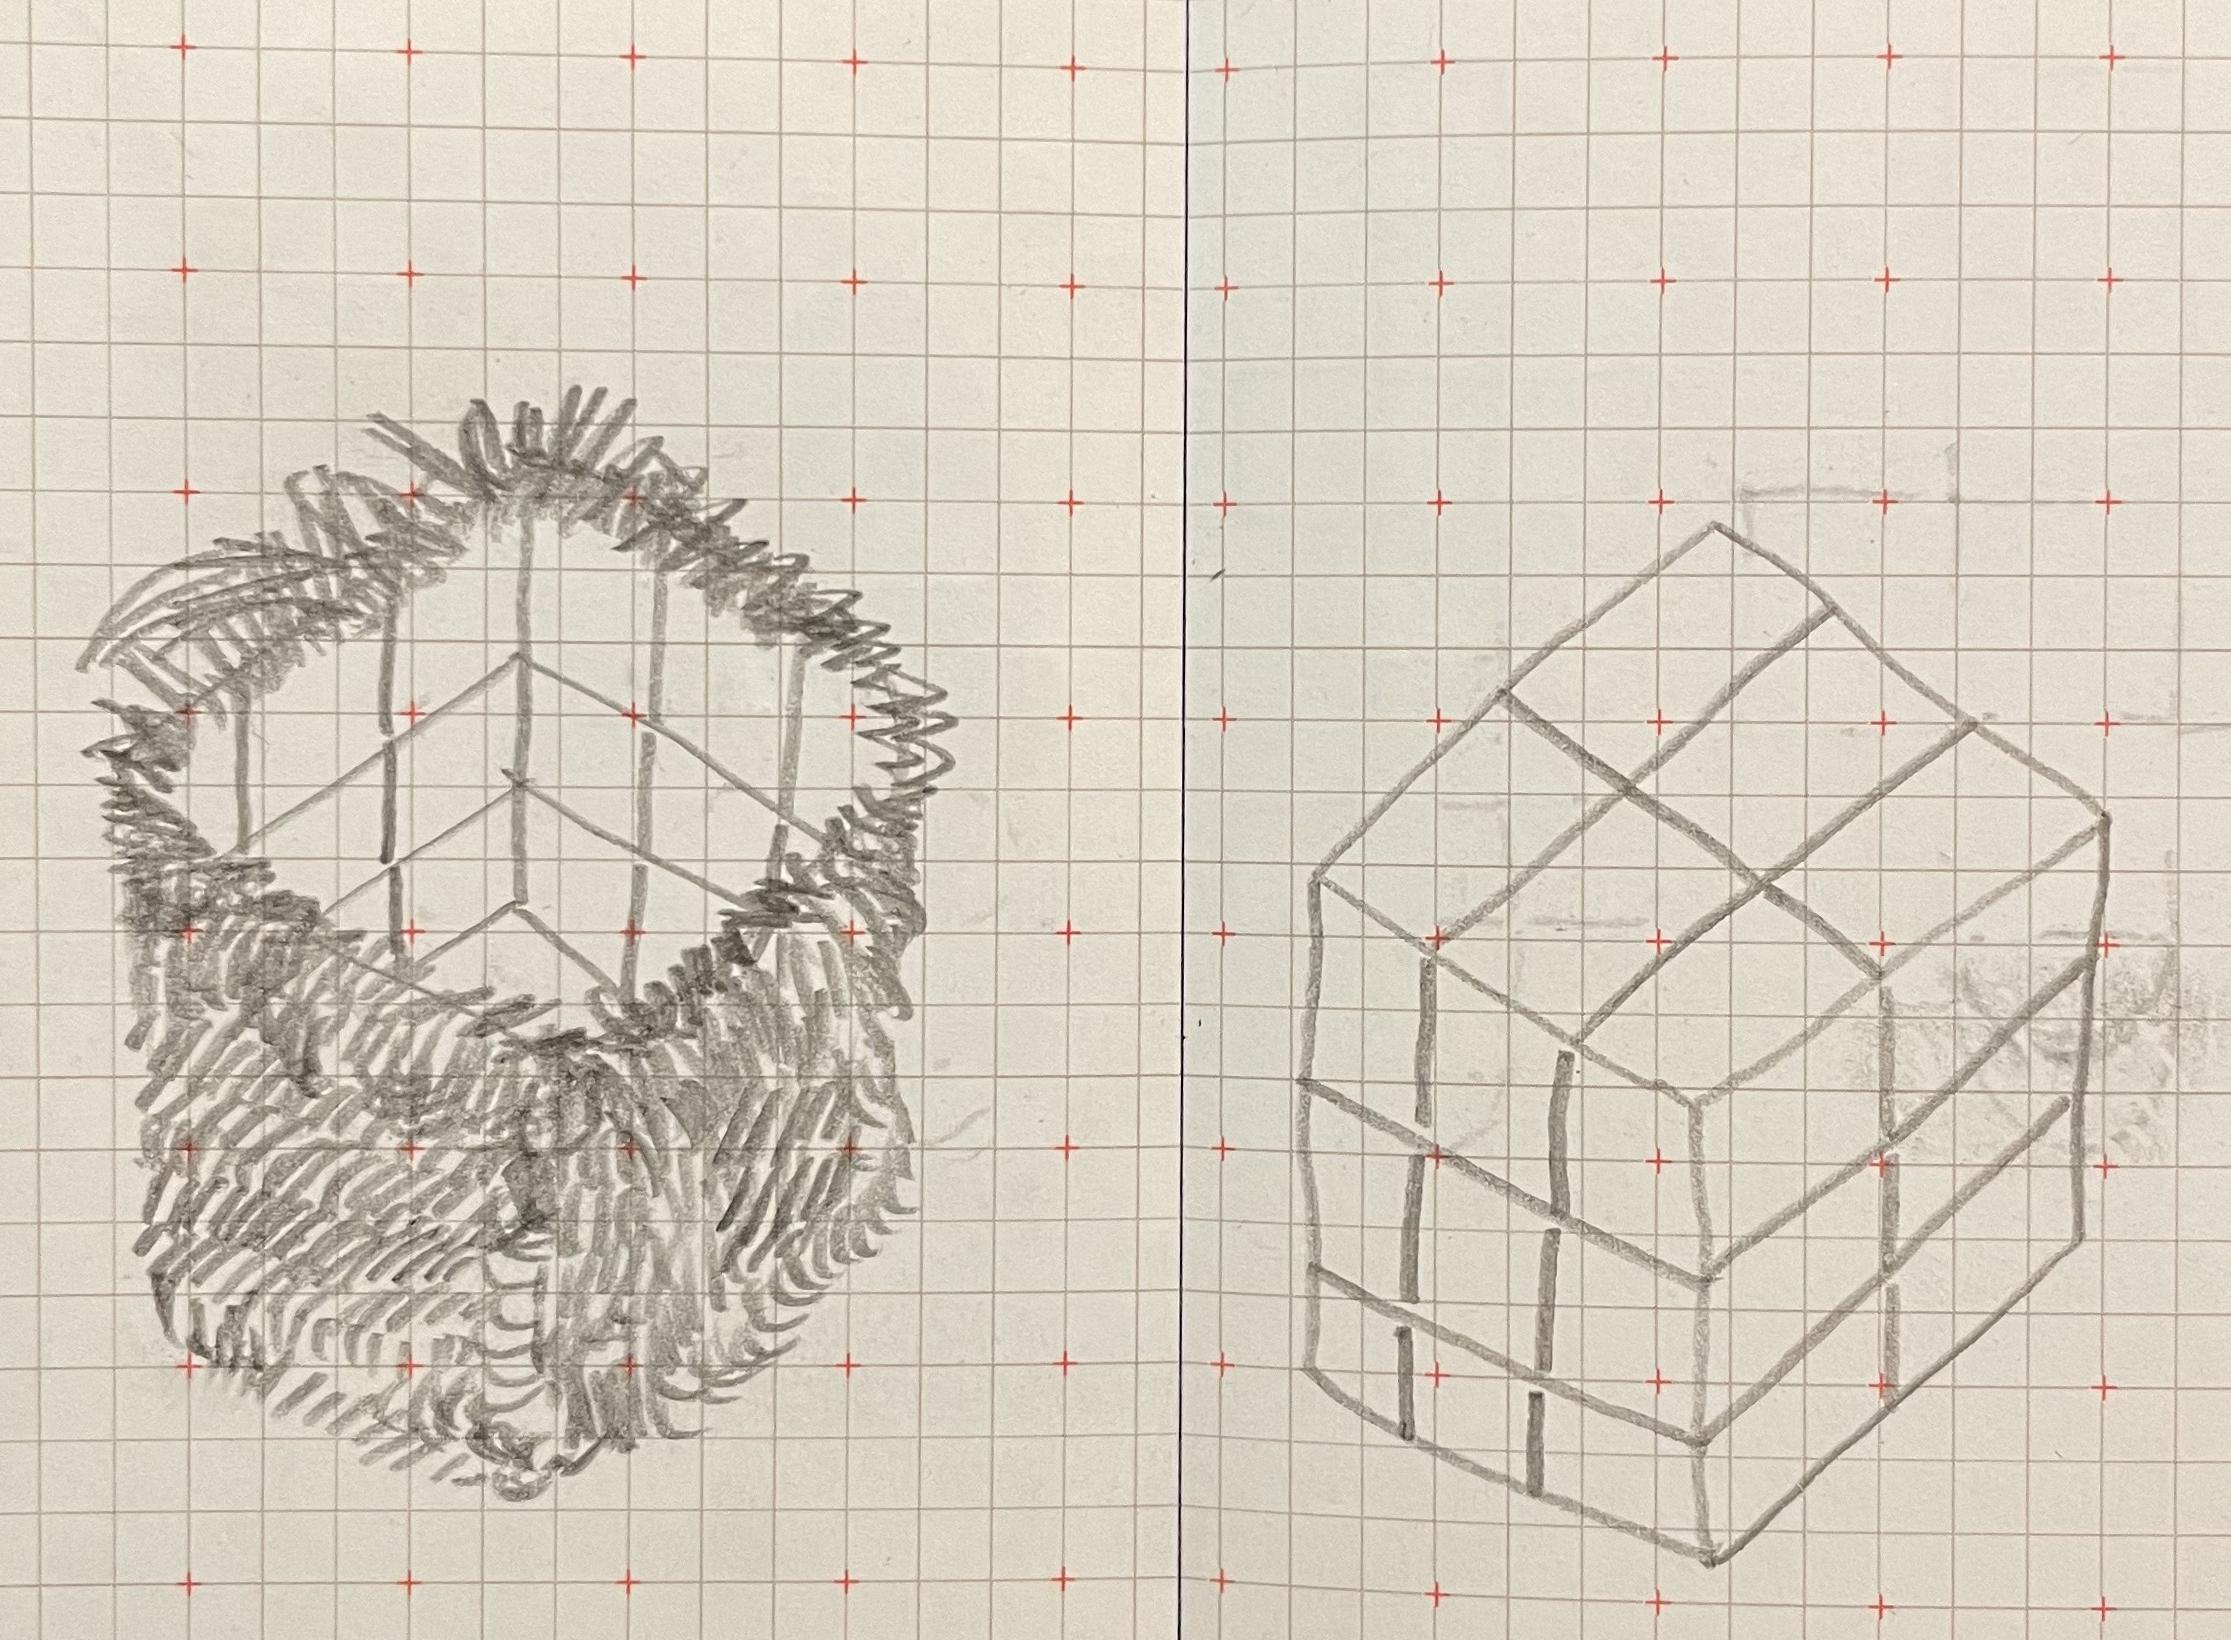 pencil drawing on grid paper of a hole in the ground and a pile of bricks